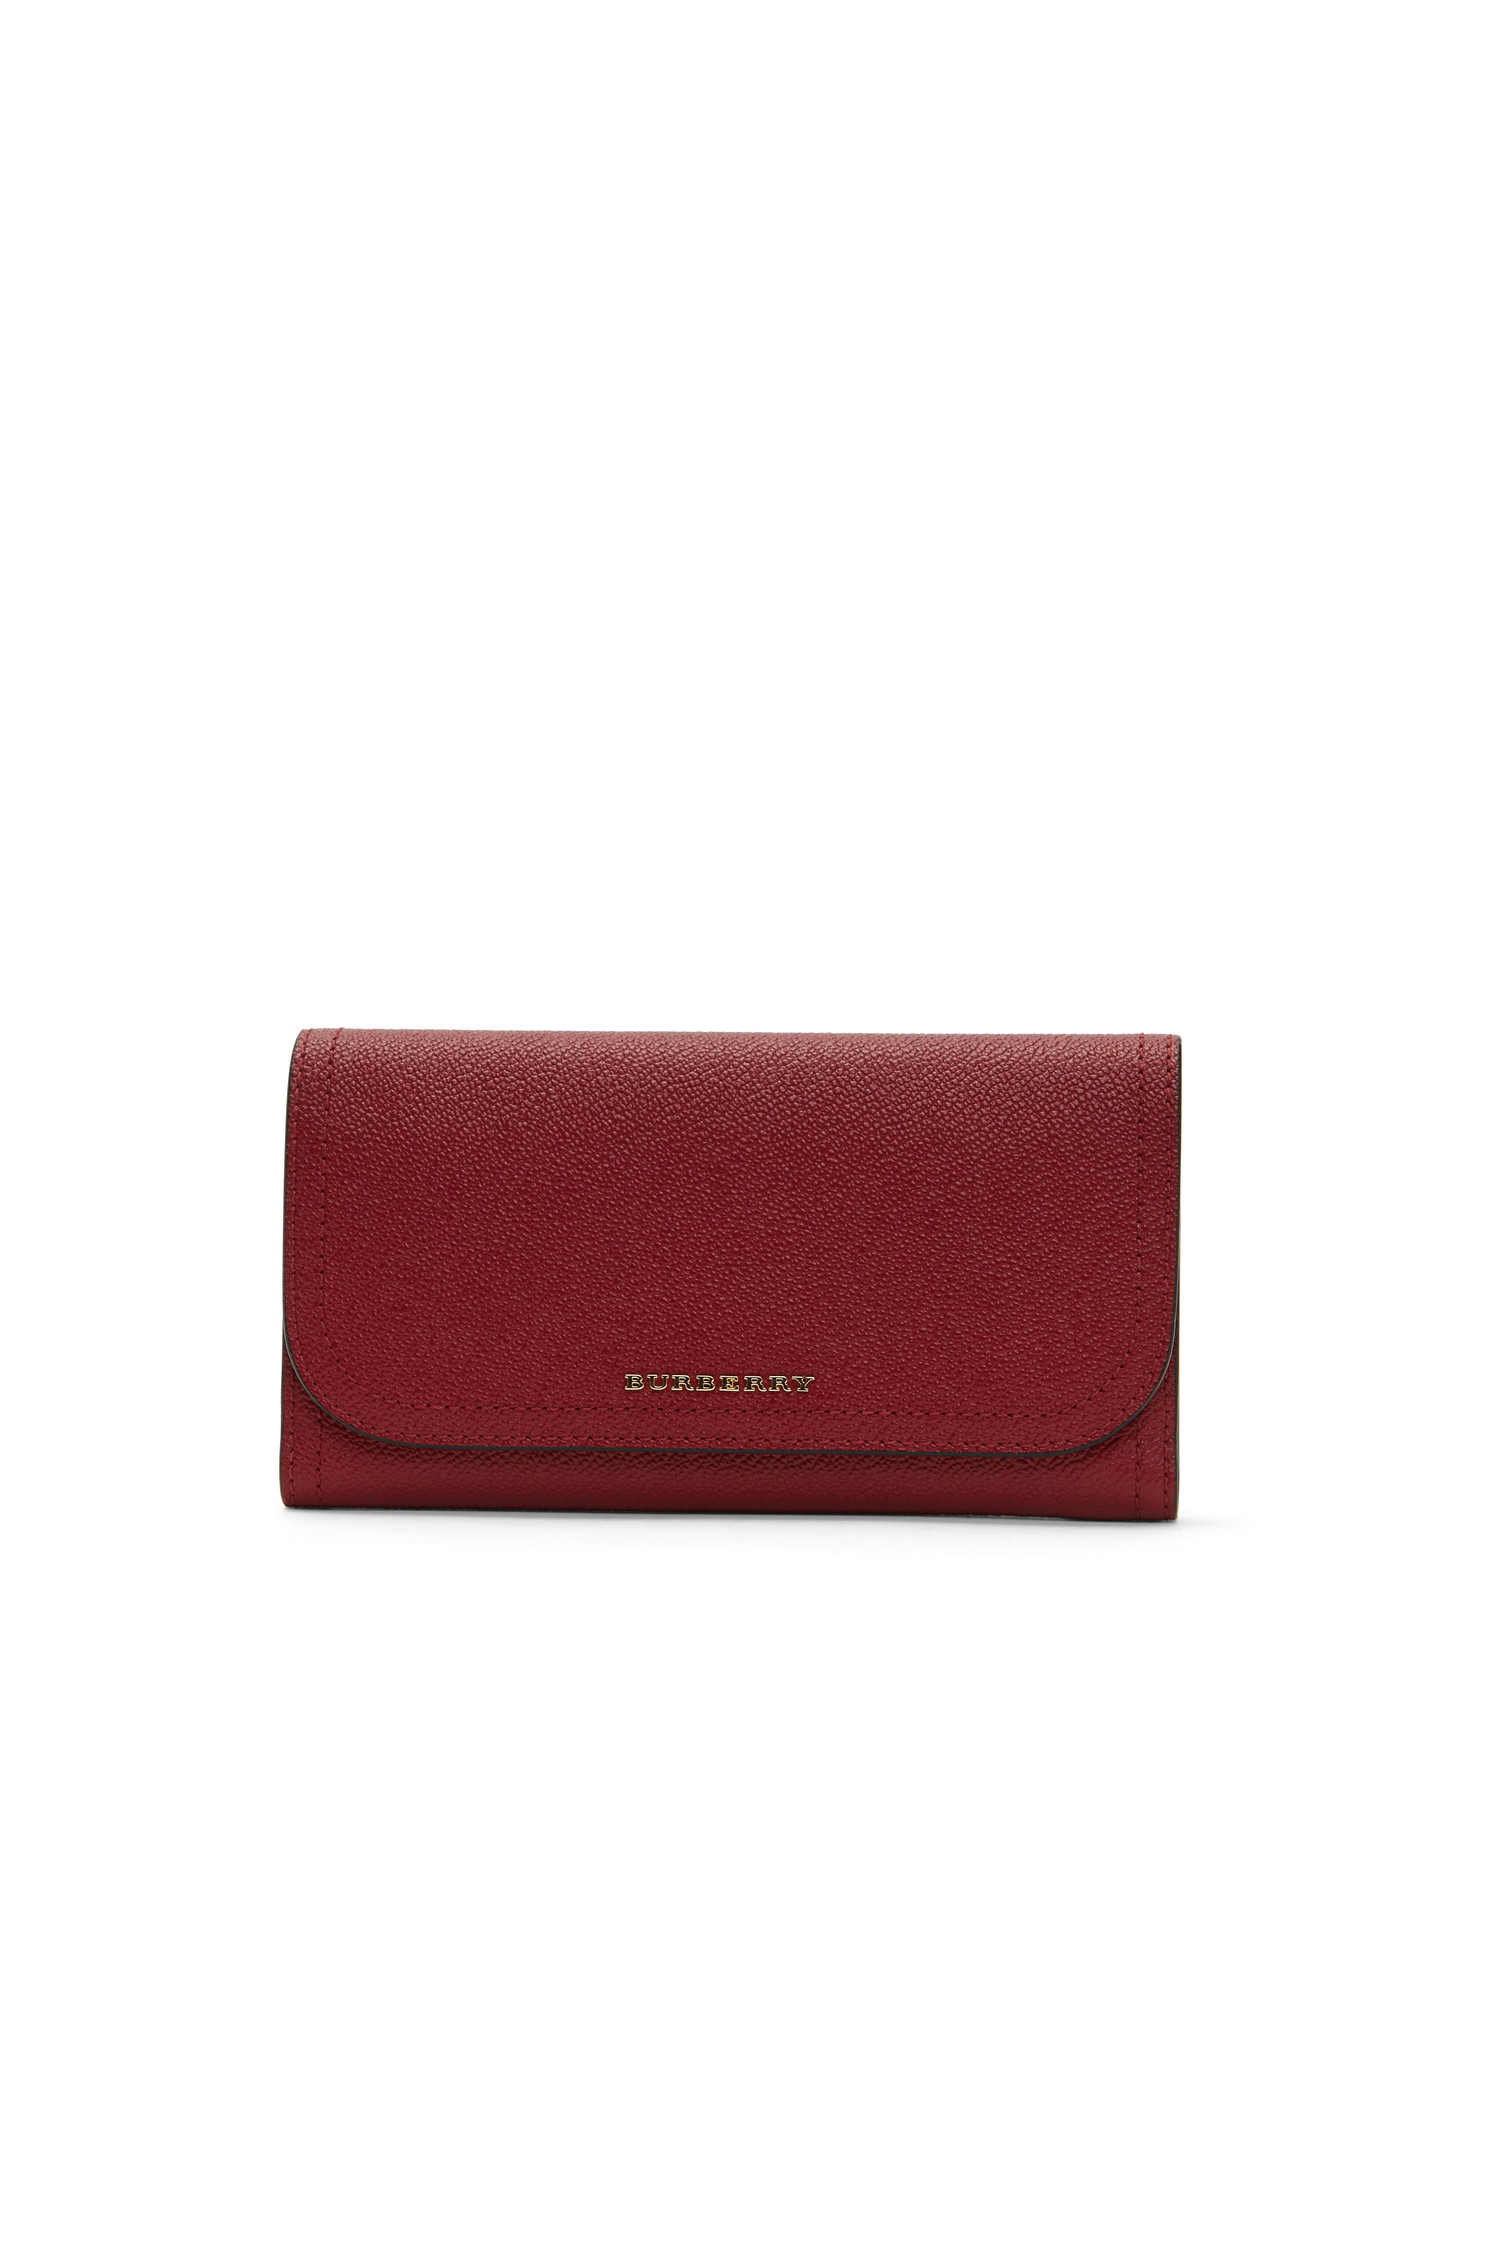 Burberry Red Perforated Leather Bill Bifold Wallet Burberry | The Luxury  Closet